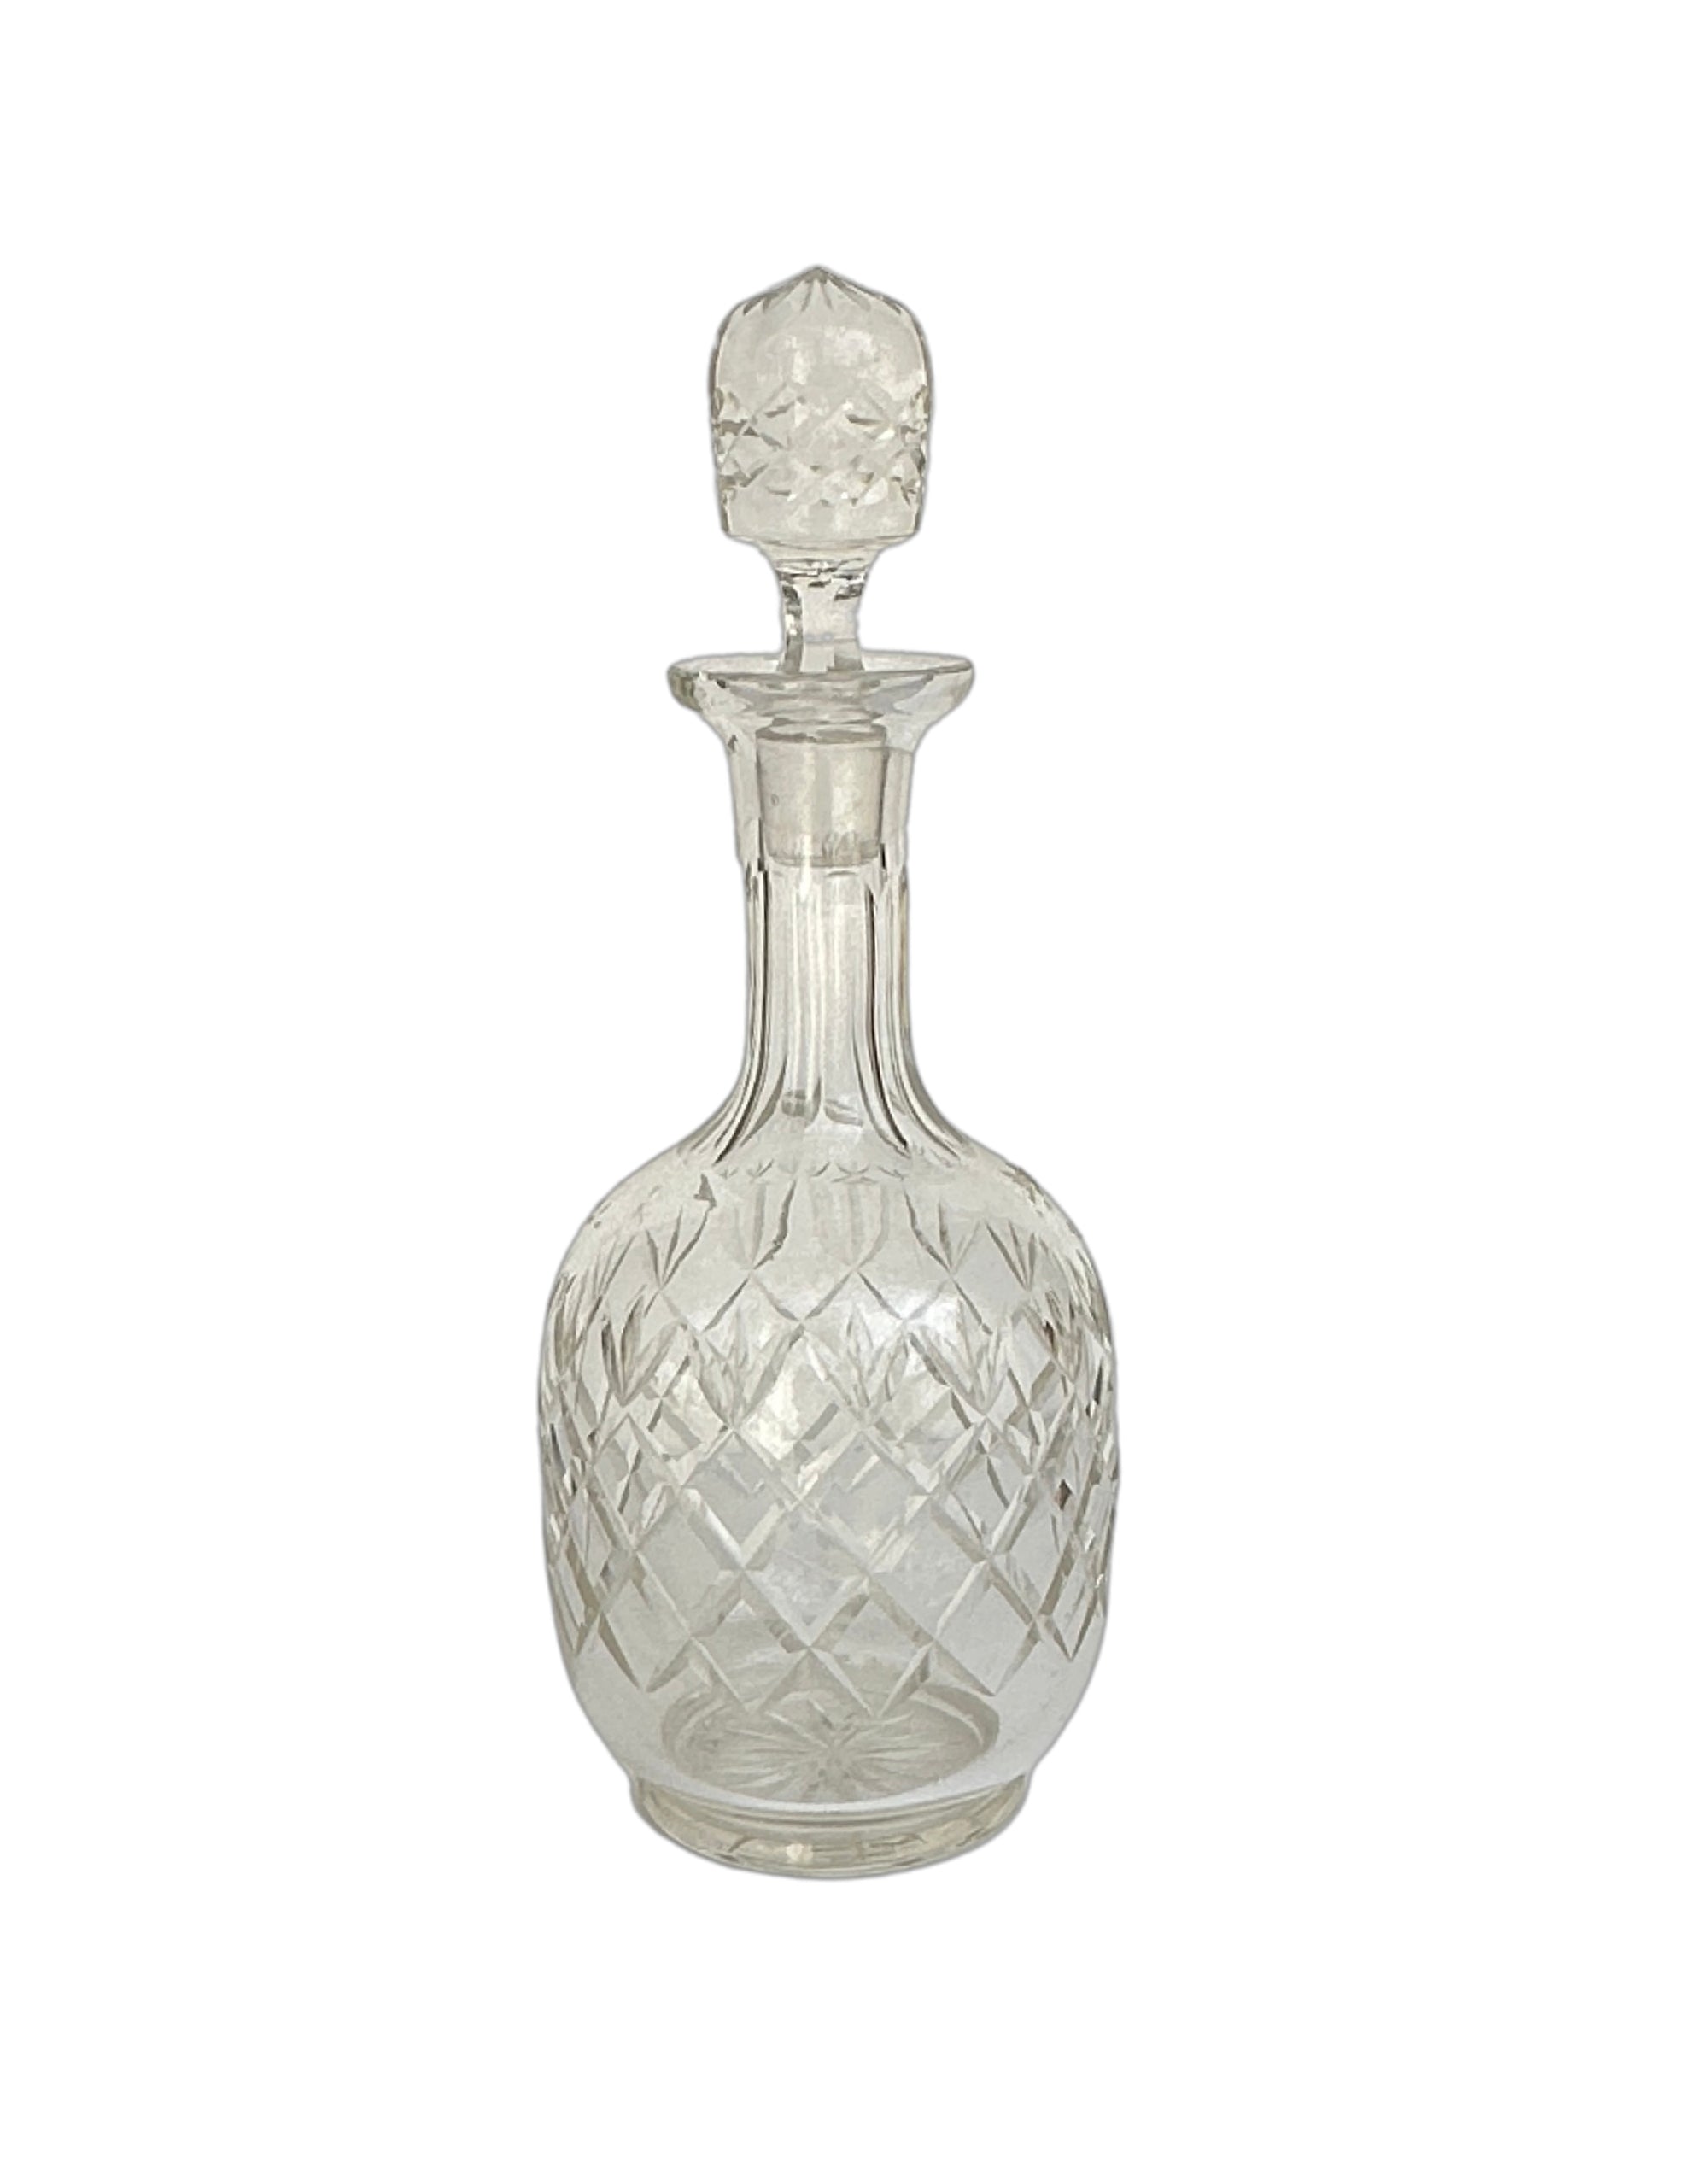 Vintage Cut Glass Whiskey Decanter